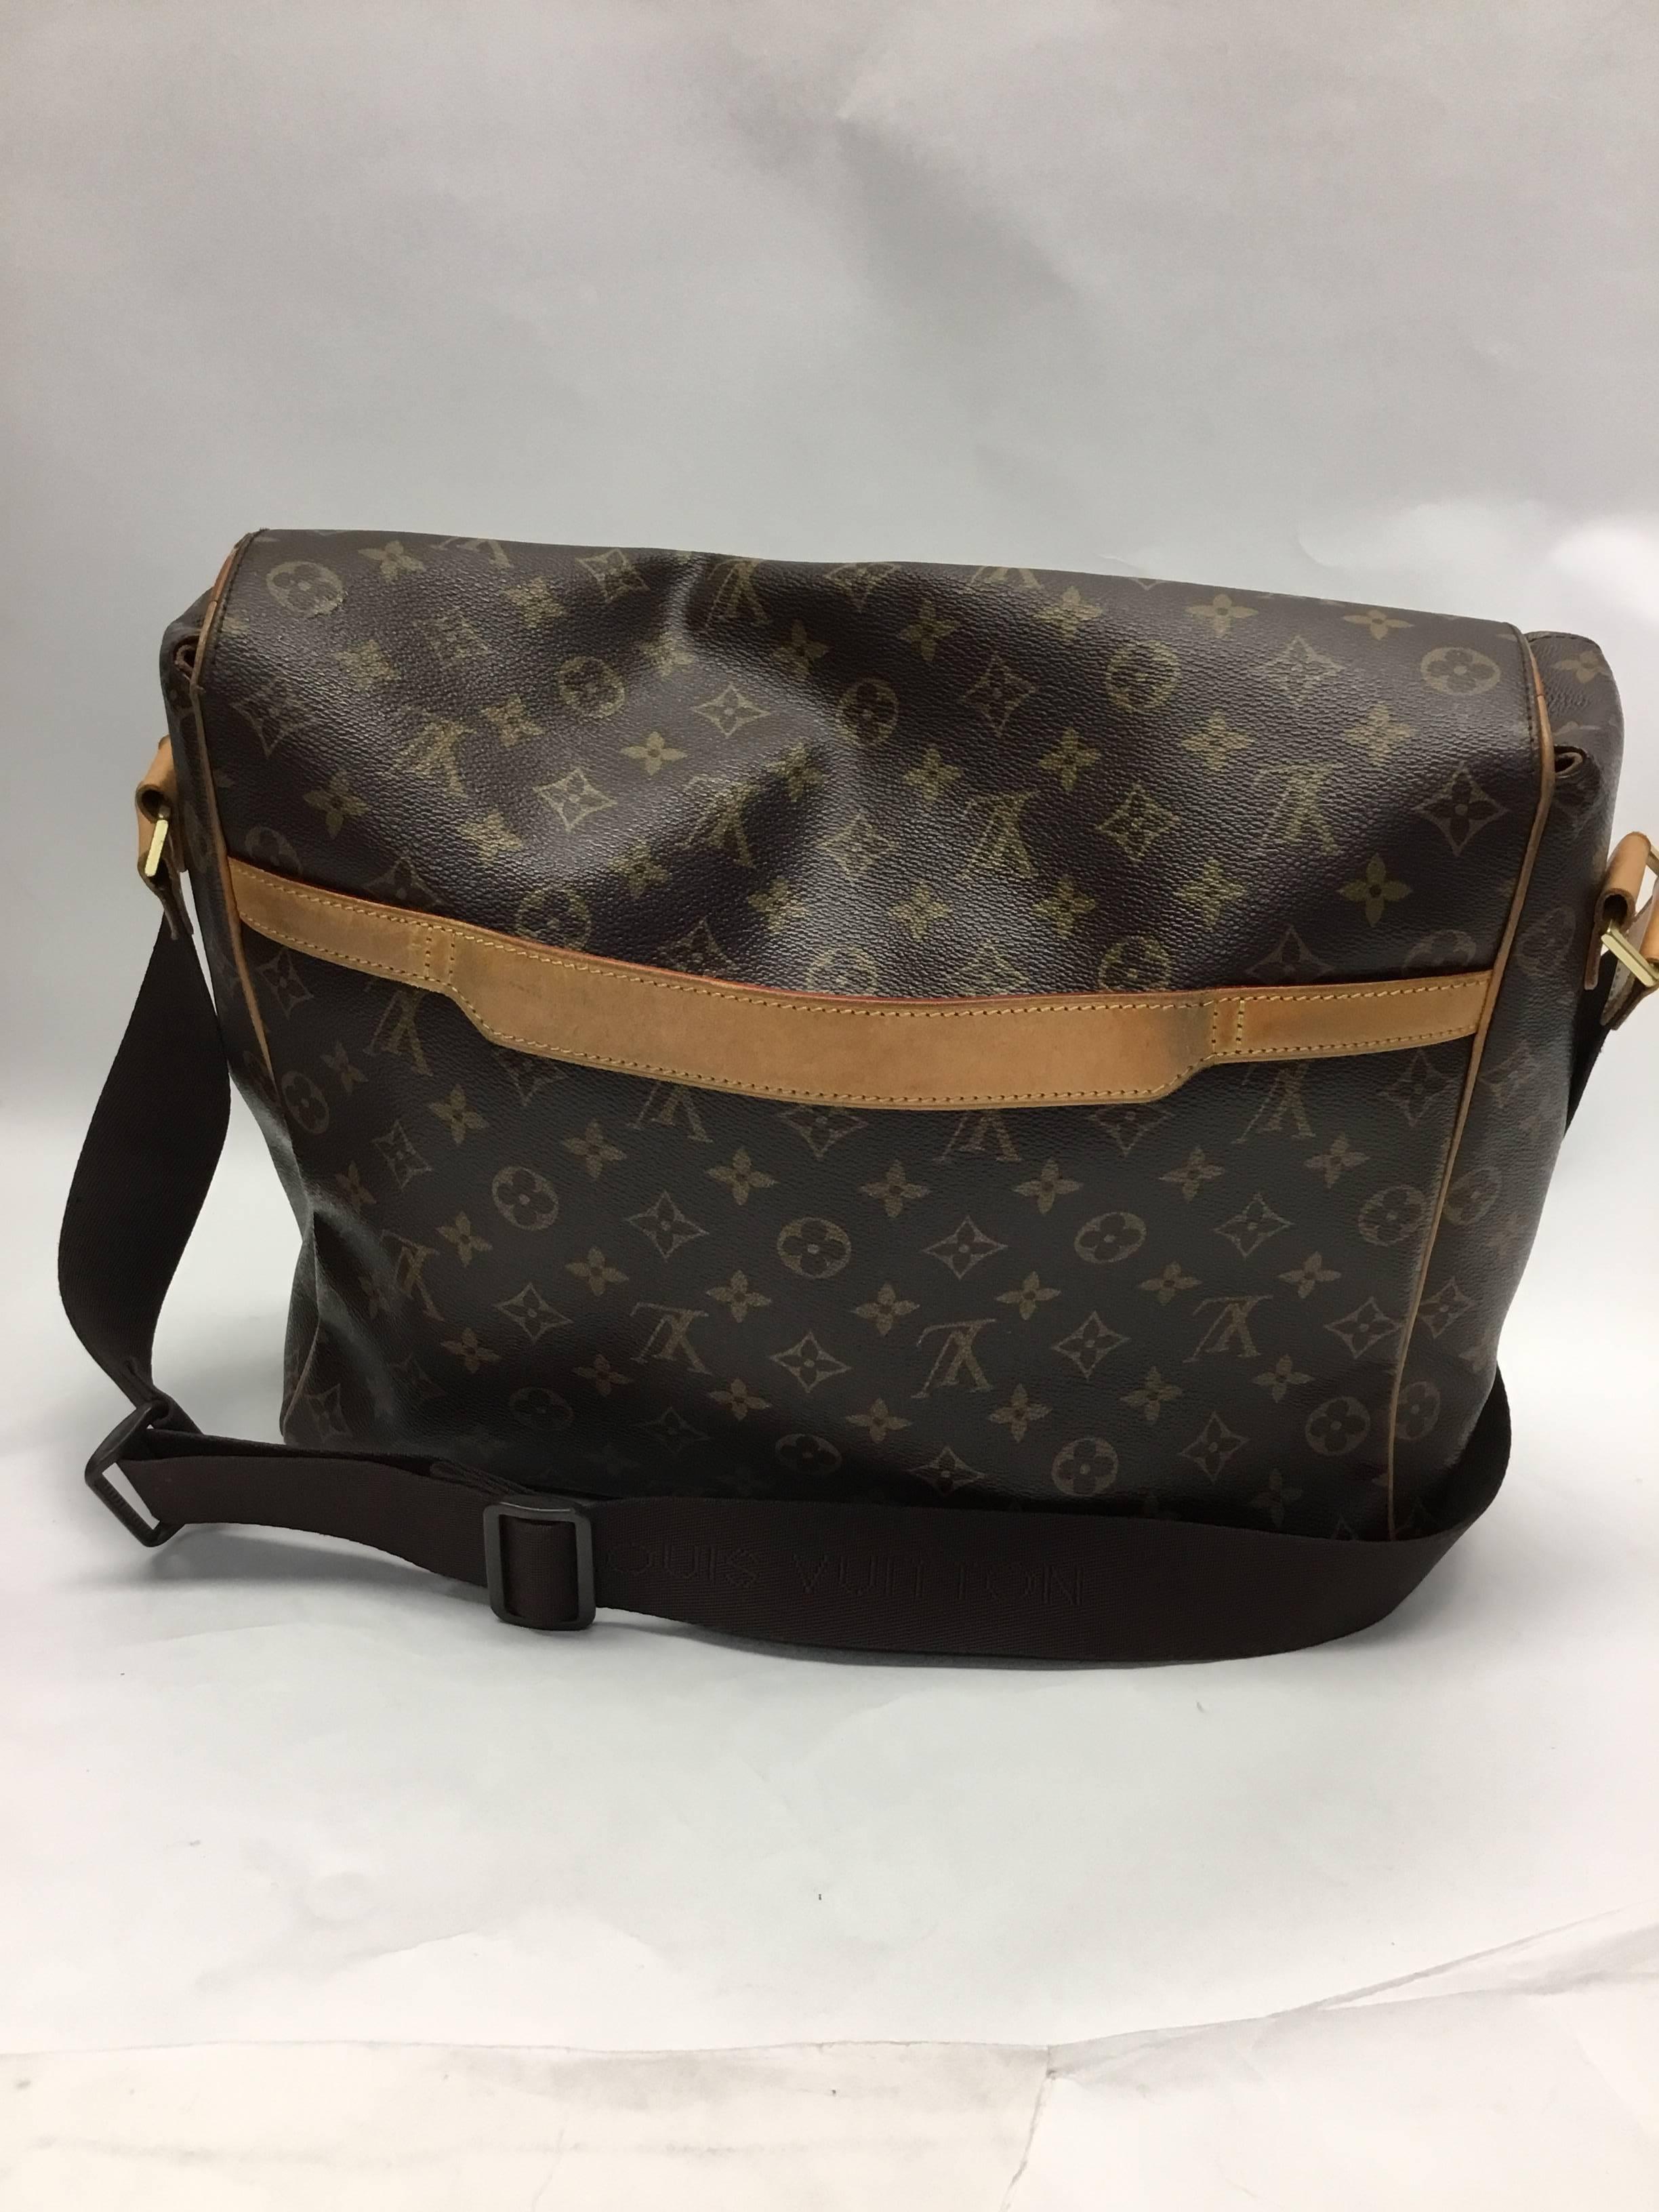 Louis Vuitton Monogram Canvas Abbesses Messenger Bag
Large flap front, two interior pockets
Exterior crossbody strap
$899
Made in Spain
Minor wear on the inside of the flap, see photos